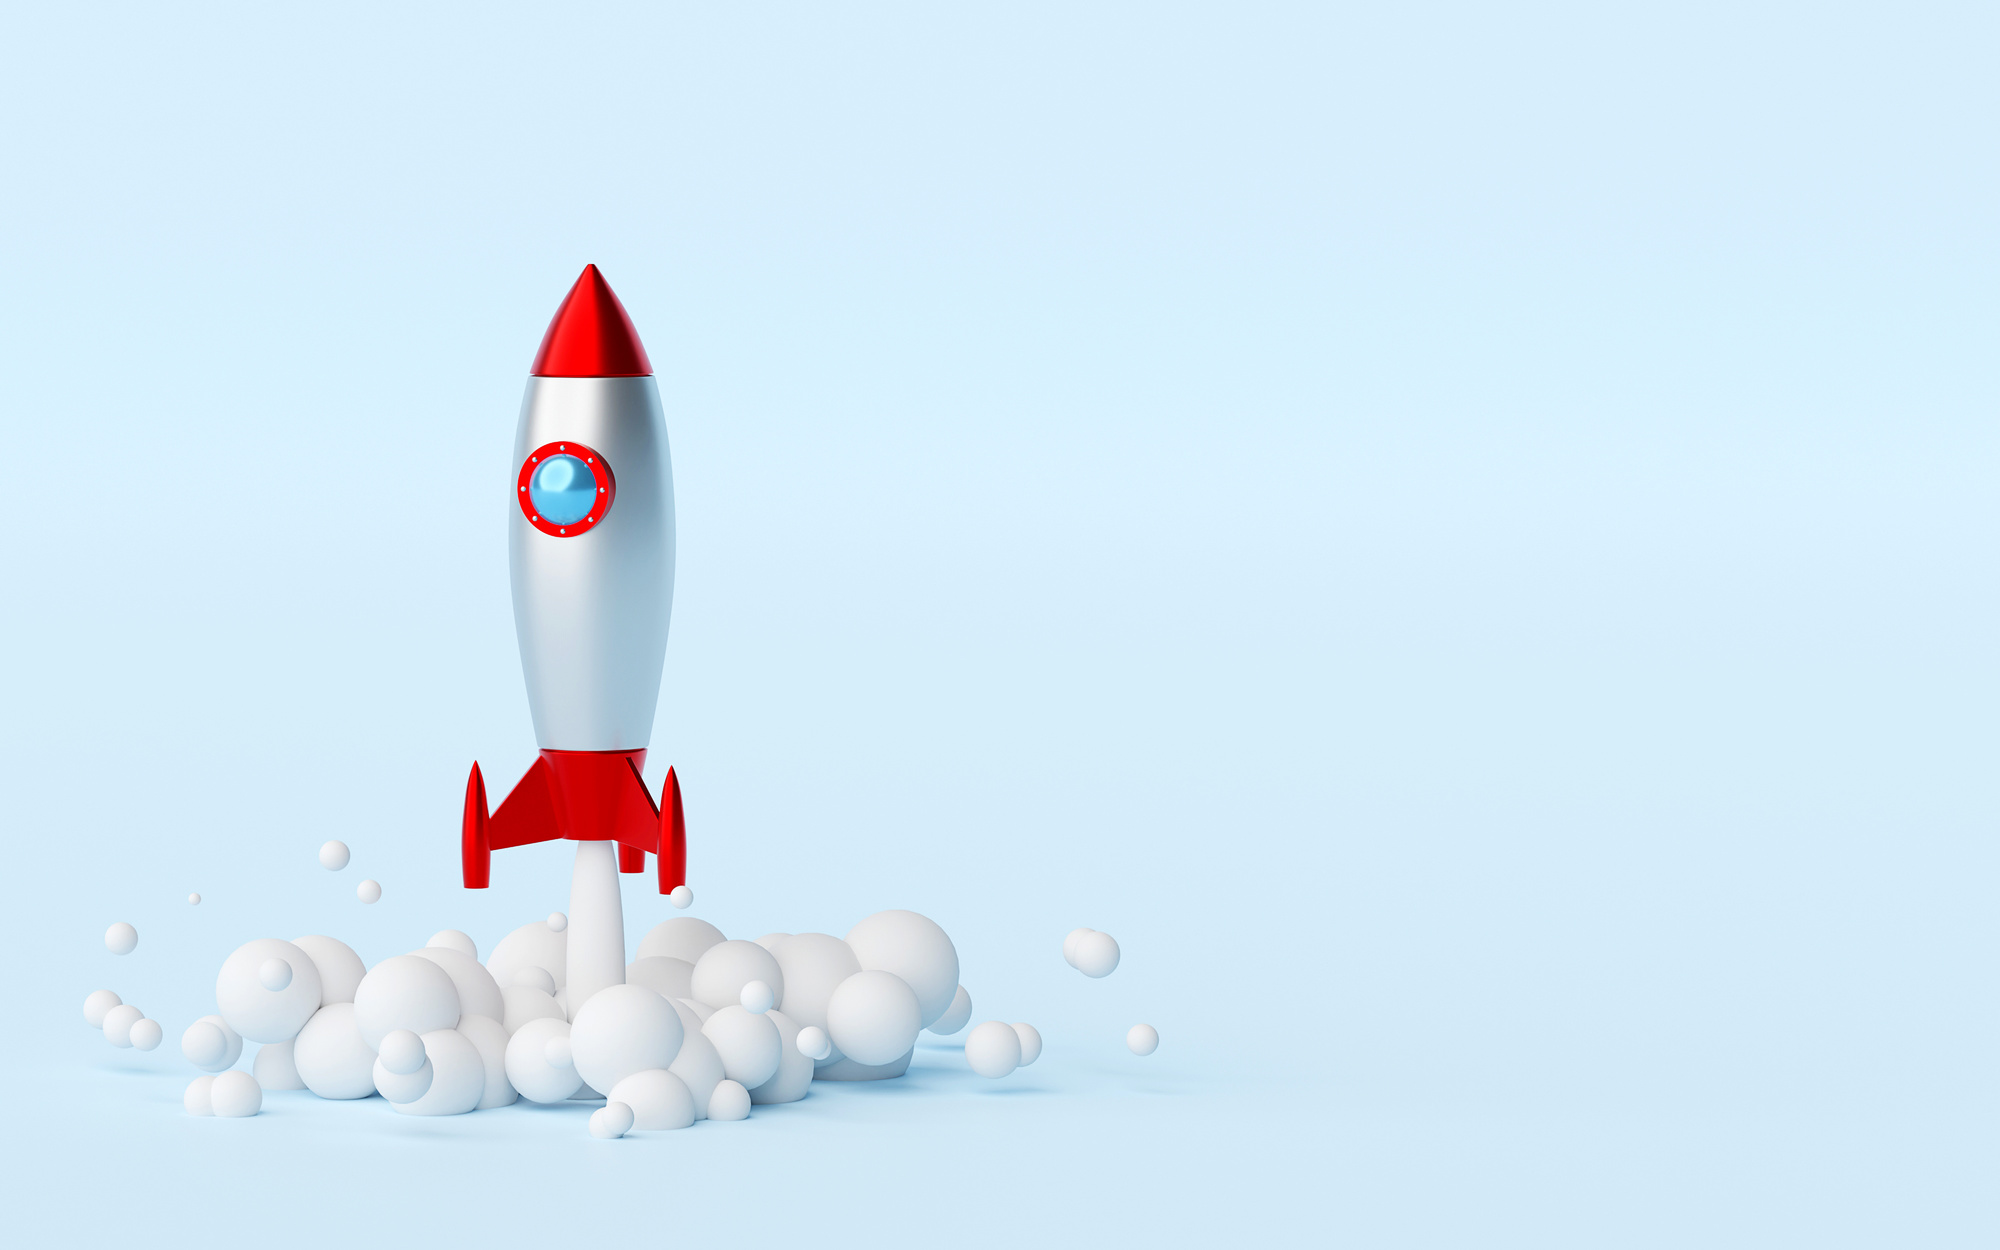 Business Start-up Concept, Rocket Launching from the Ground, 3D